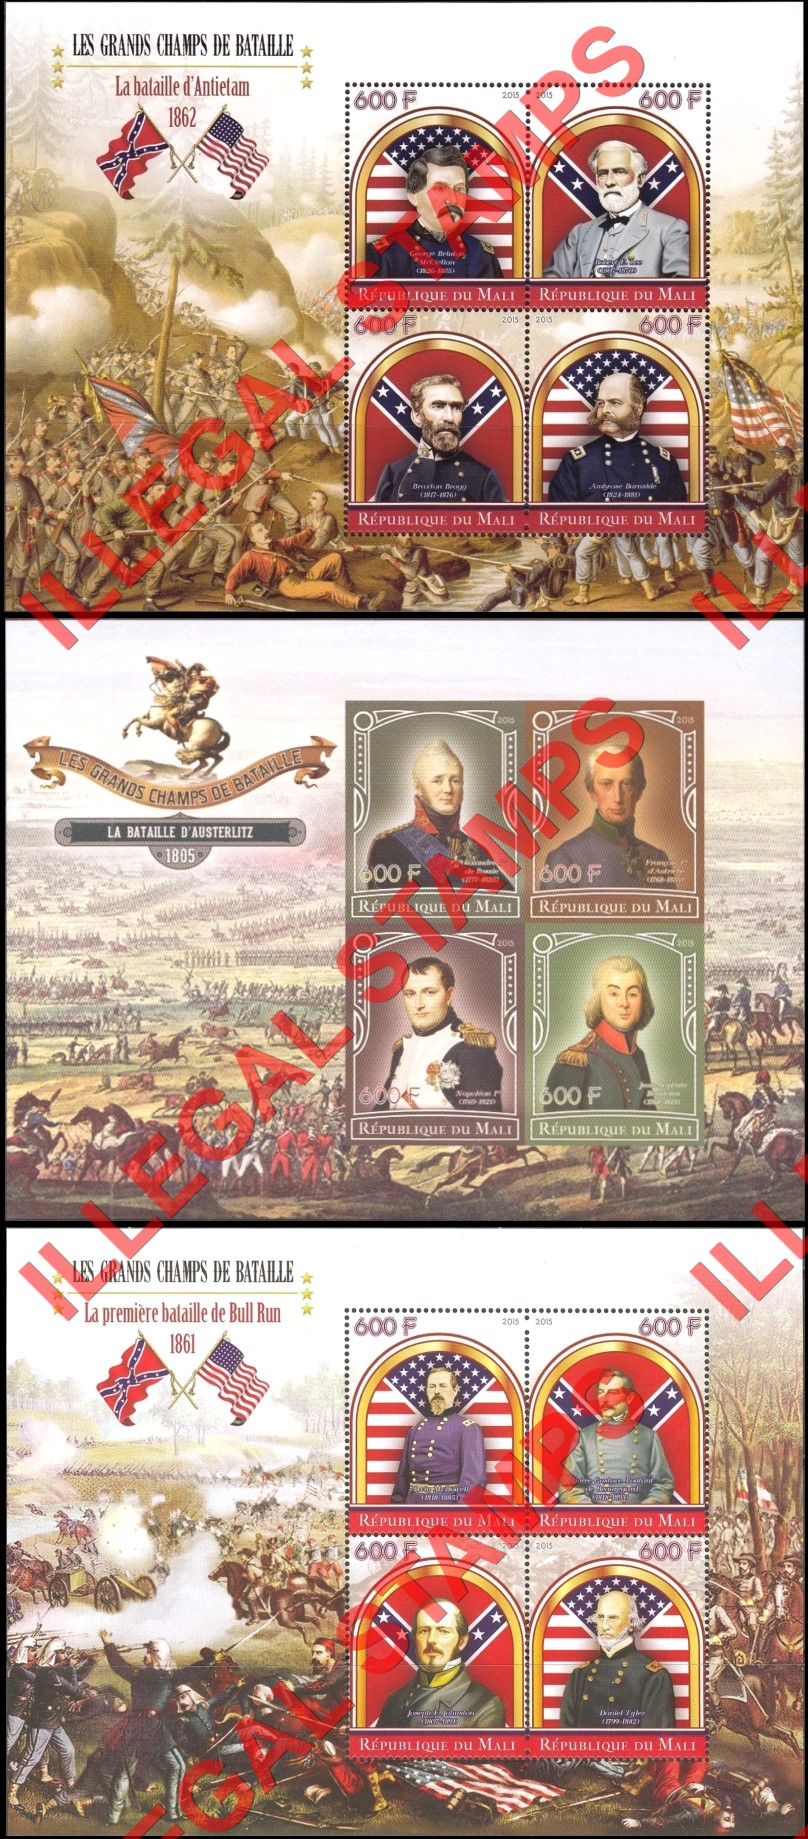 Mali 2015 Military Leaders and Battles Illegal Stamp Souvenir Sheets of 4 (Part 1)